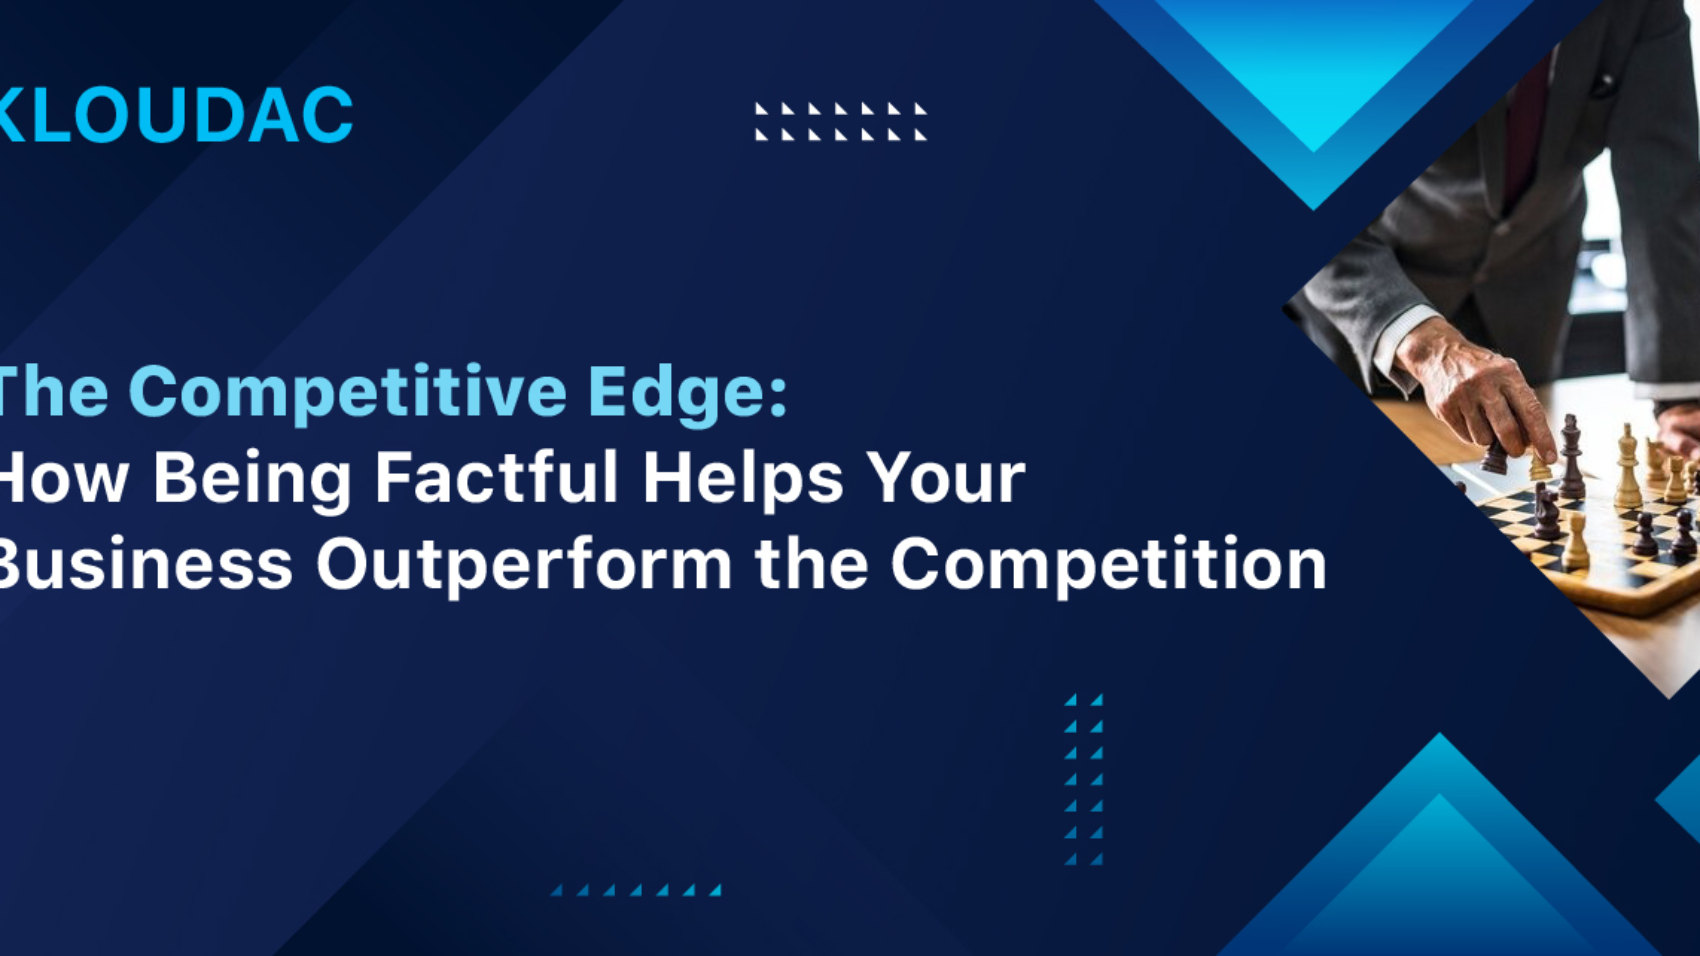 The Competitive Edge: How Being Factful Helps Your Business Outperform the Competition